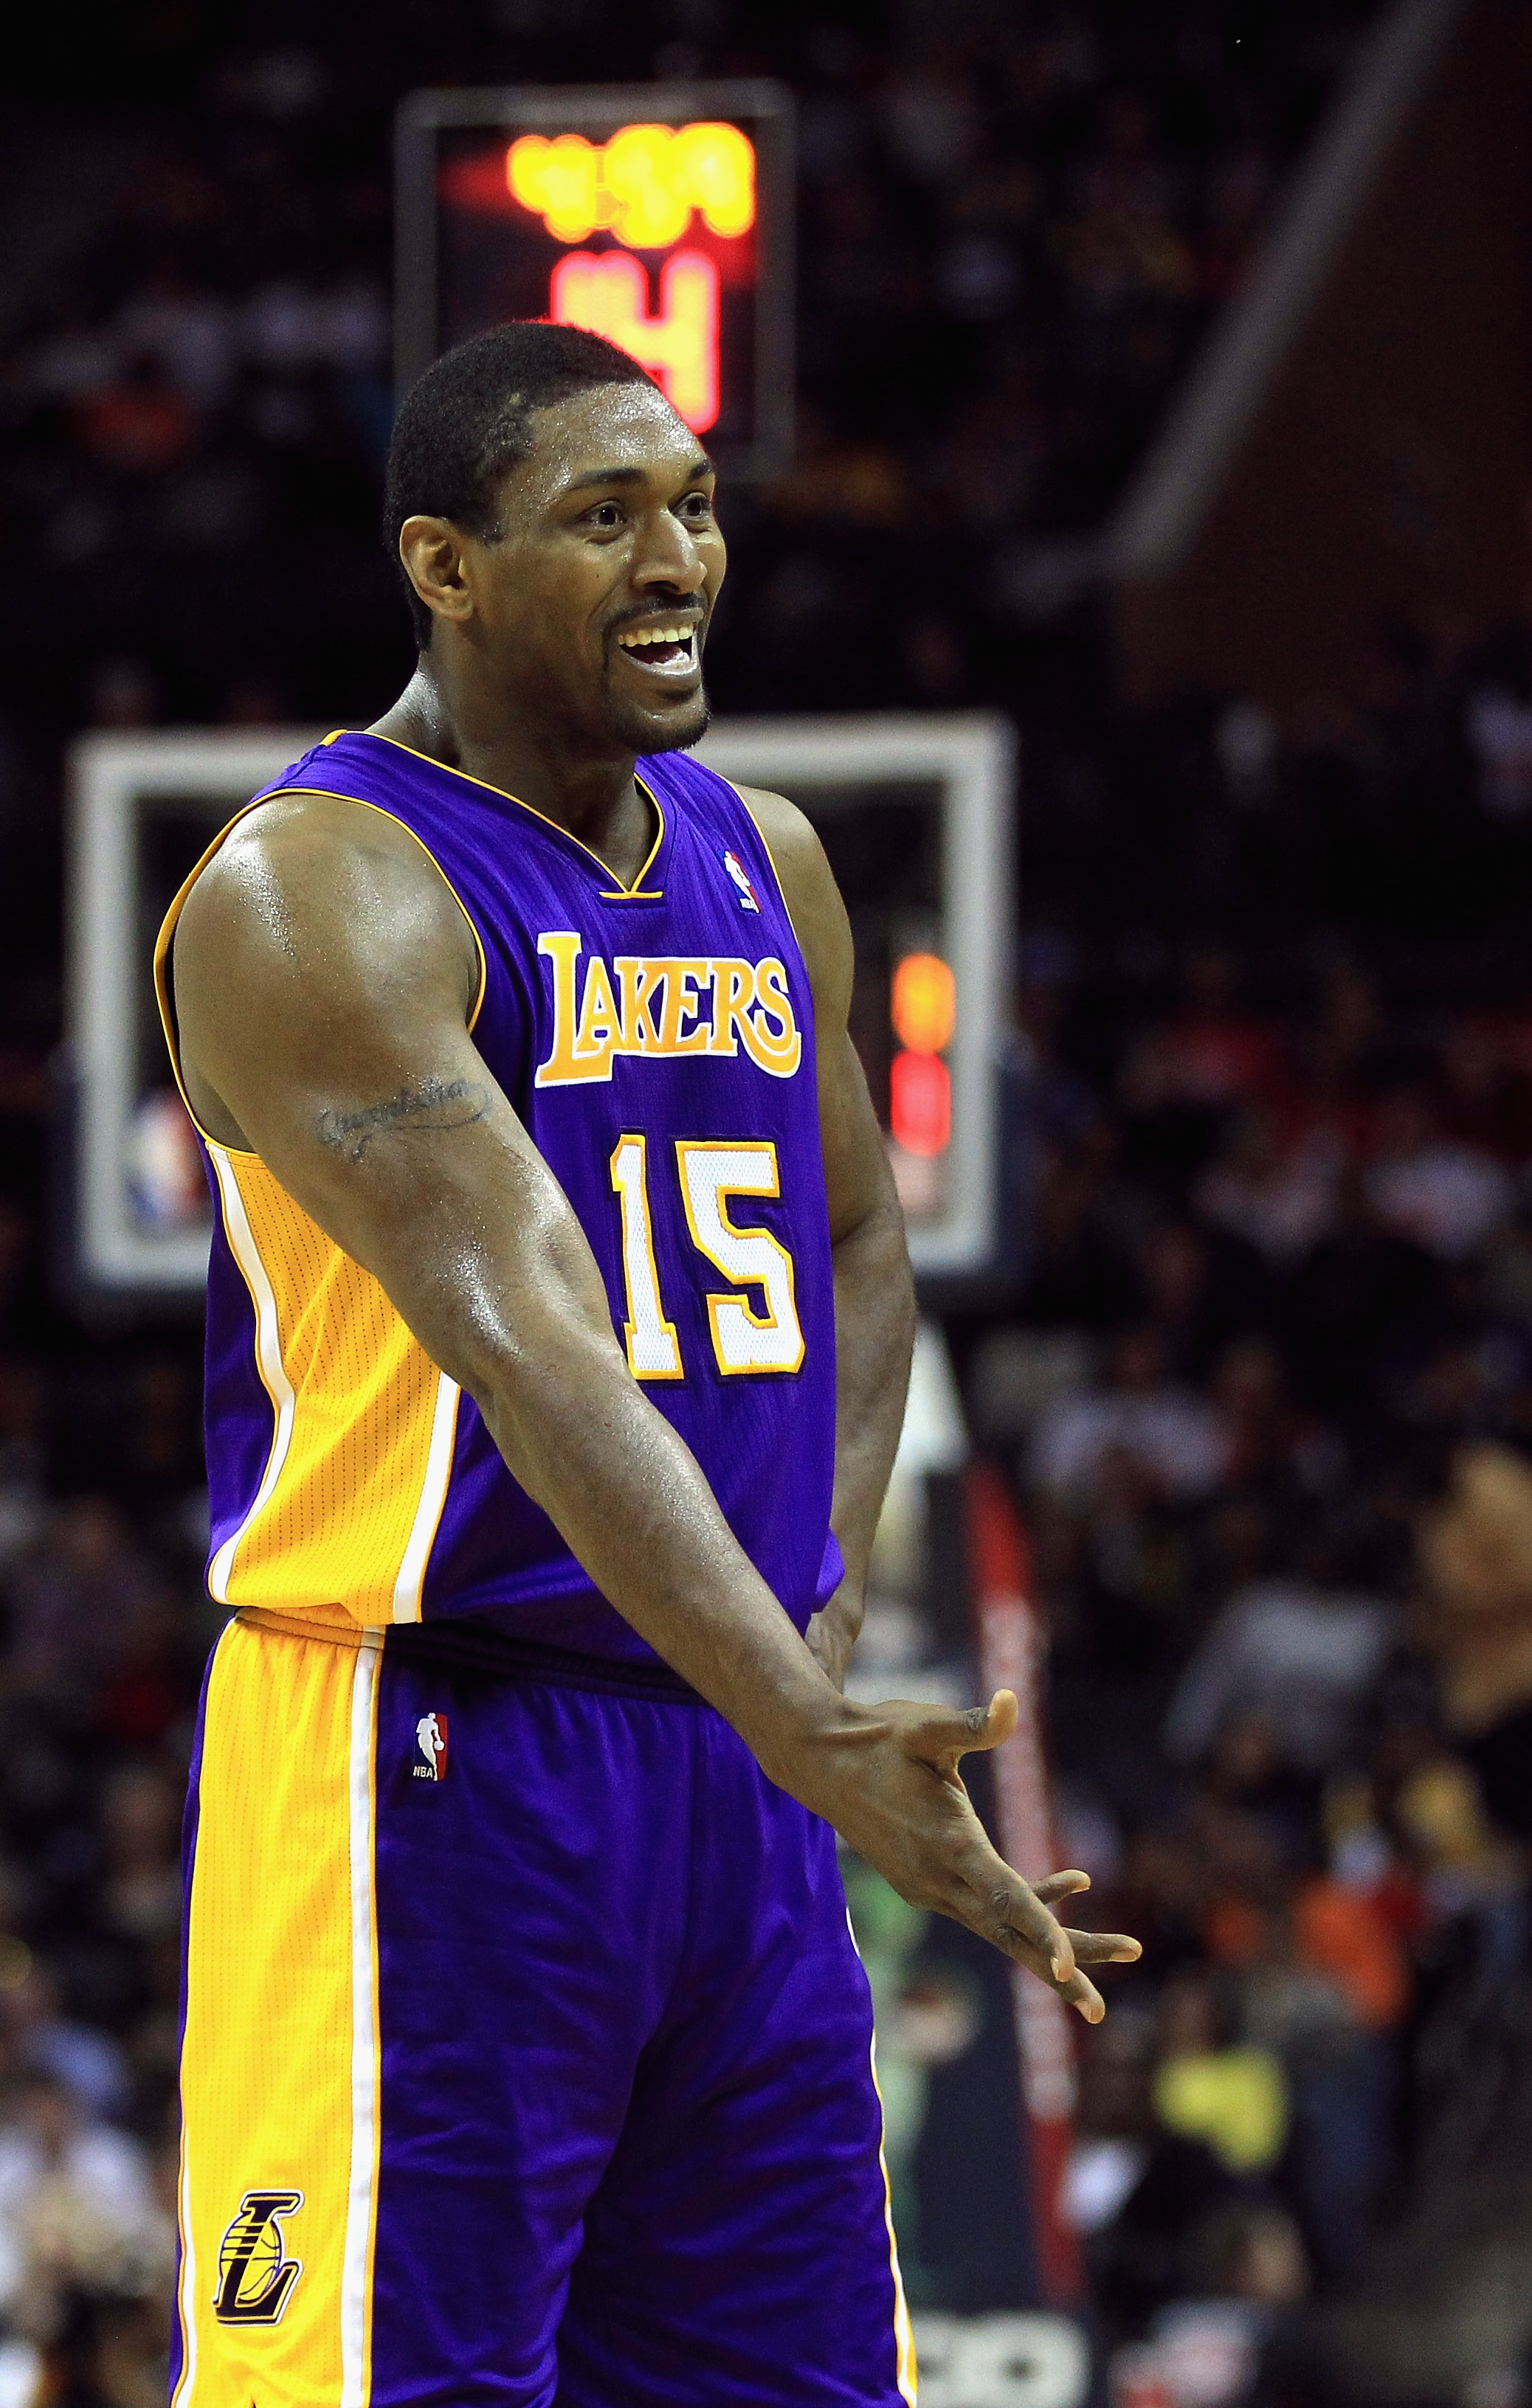 CHARLOTTE, NC - FEBRUARY 14:  Ron Artest #15 of the Los Angeles Lakers reacts to a call against the Charlotte Bobcats during their game at Time Warner Cable Arena on February 14, 2011 in Charlotte, North Carolina. NOTE TO USER: User expressly acknowledges